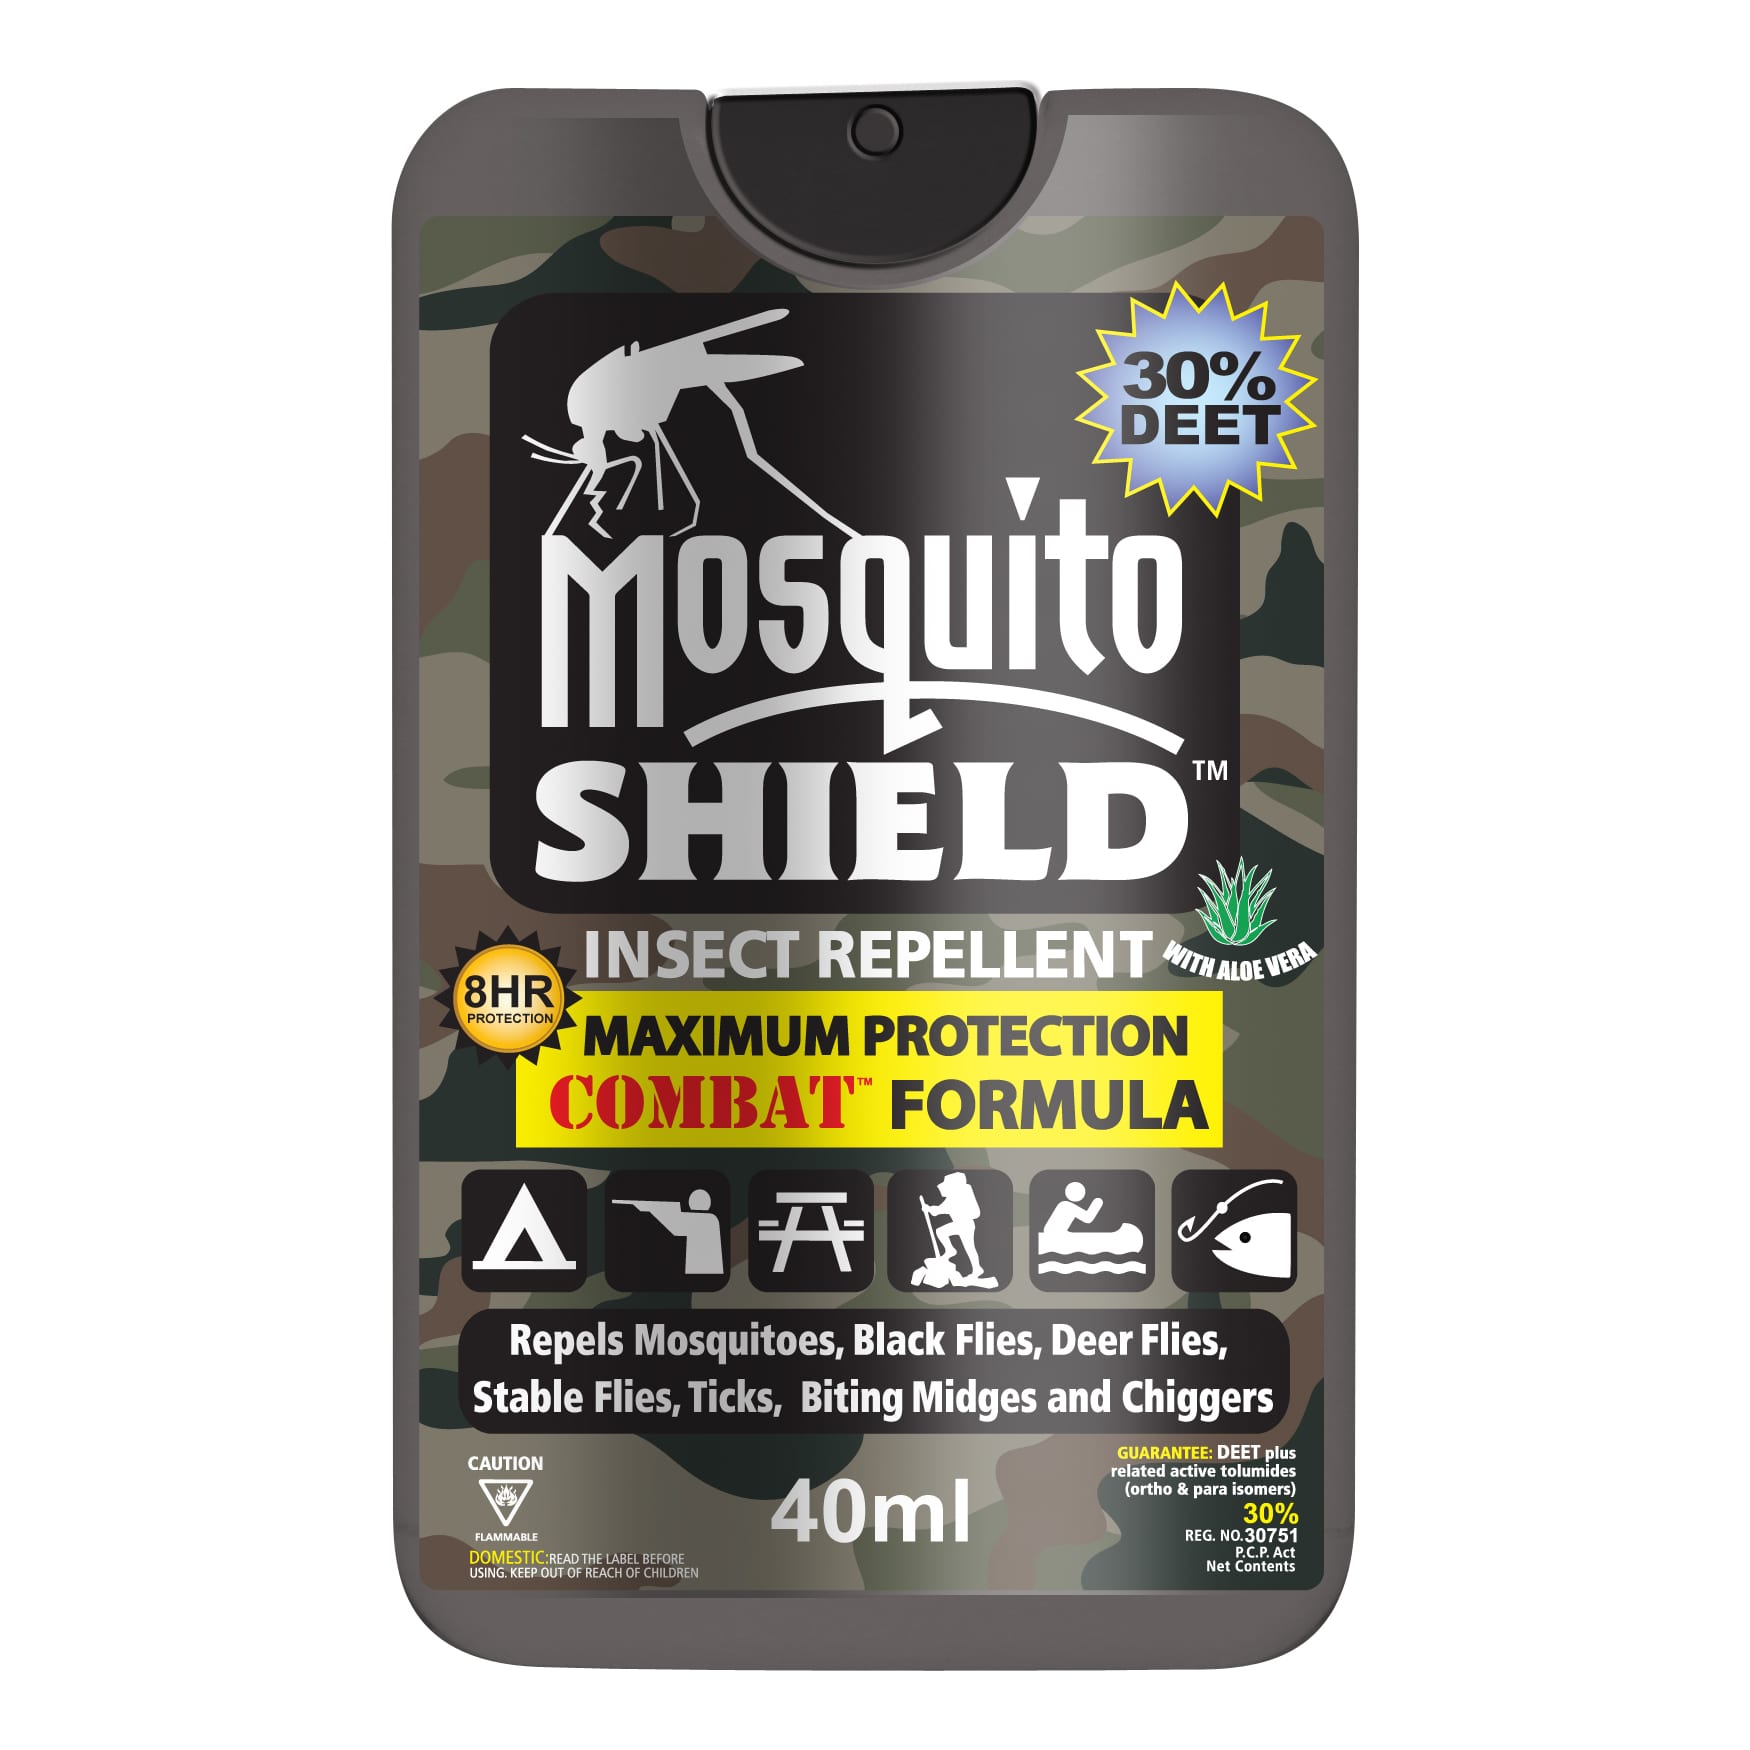 Mosquito Shield™ PiACTIVE™ Deet Free Insect Repellent